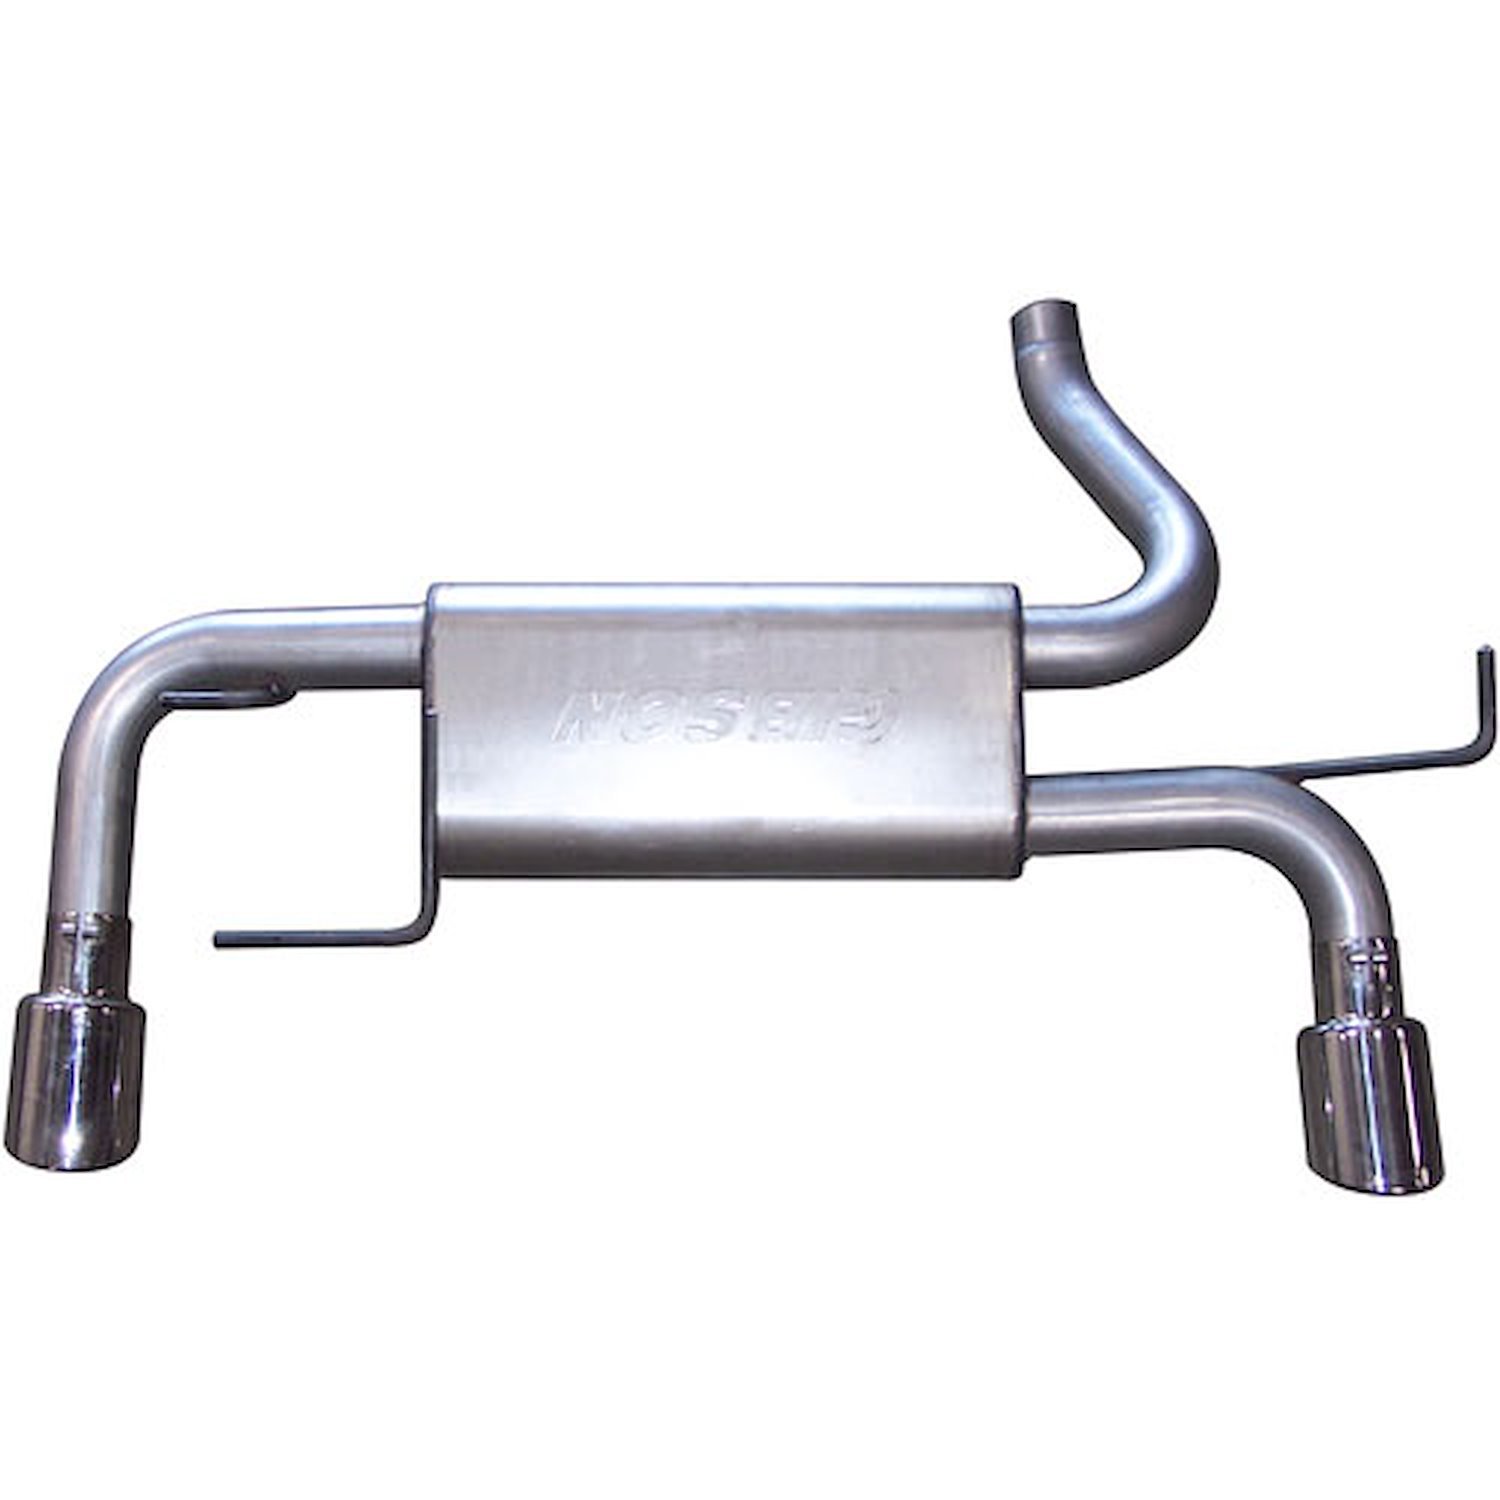 Swept-Side Cat-Back Exhaust 2006-08 for Nissan Murano 3.5L